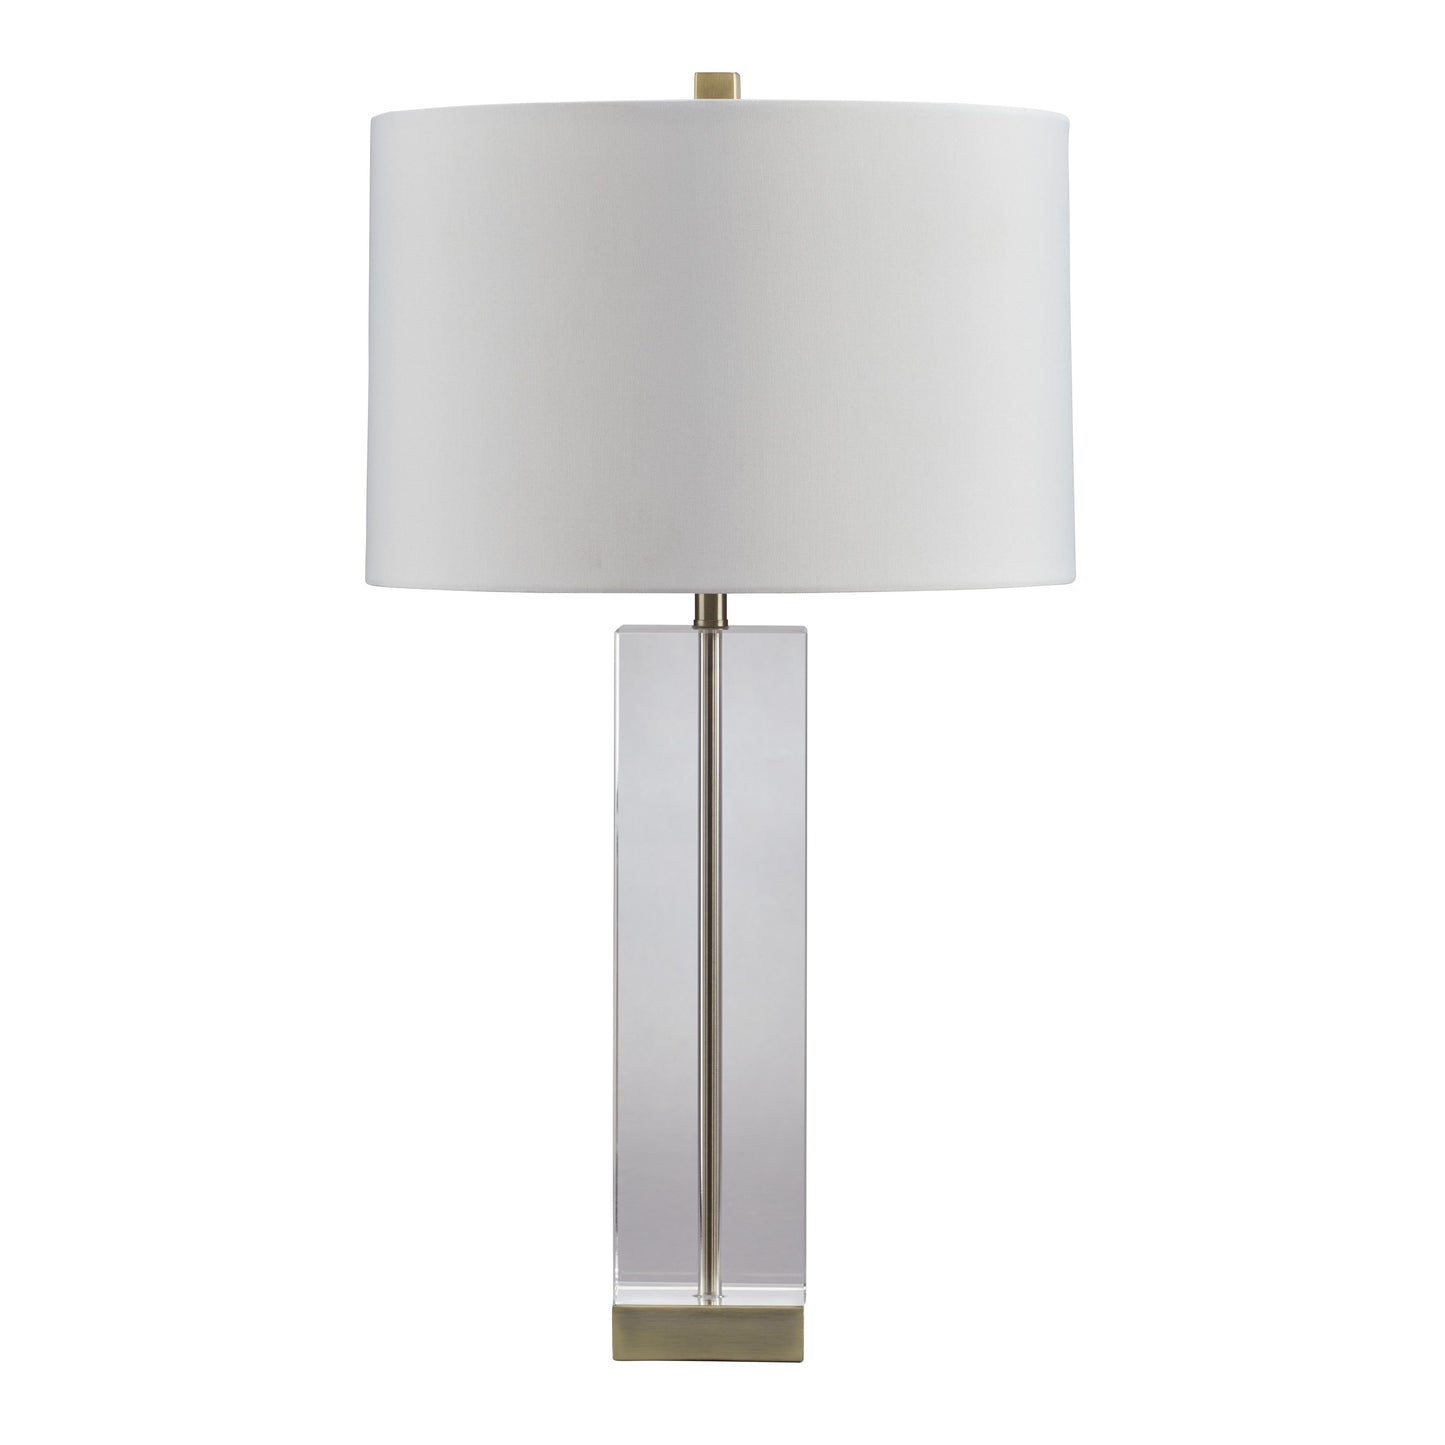 Signature Design by Ashley Teelsen Table Lamp L428184 IMAGE 1